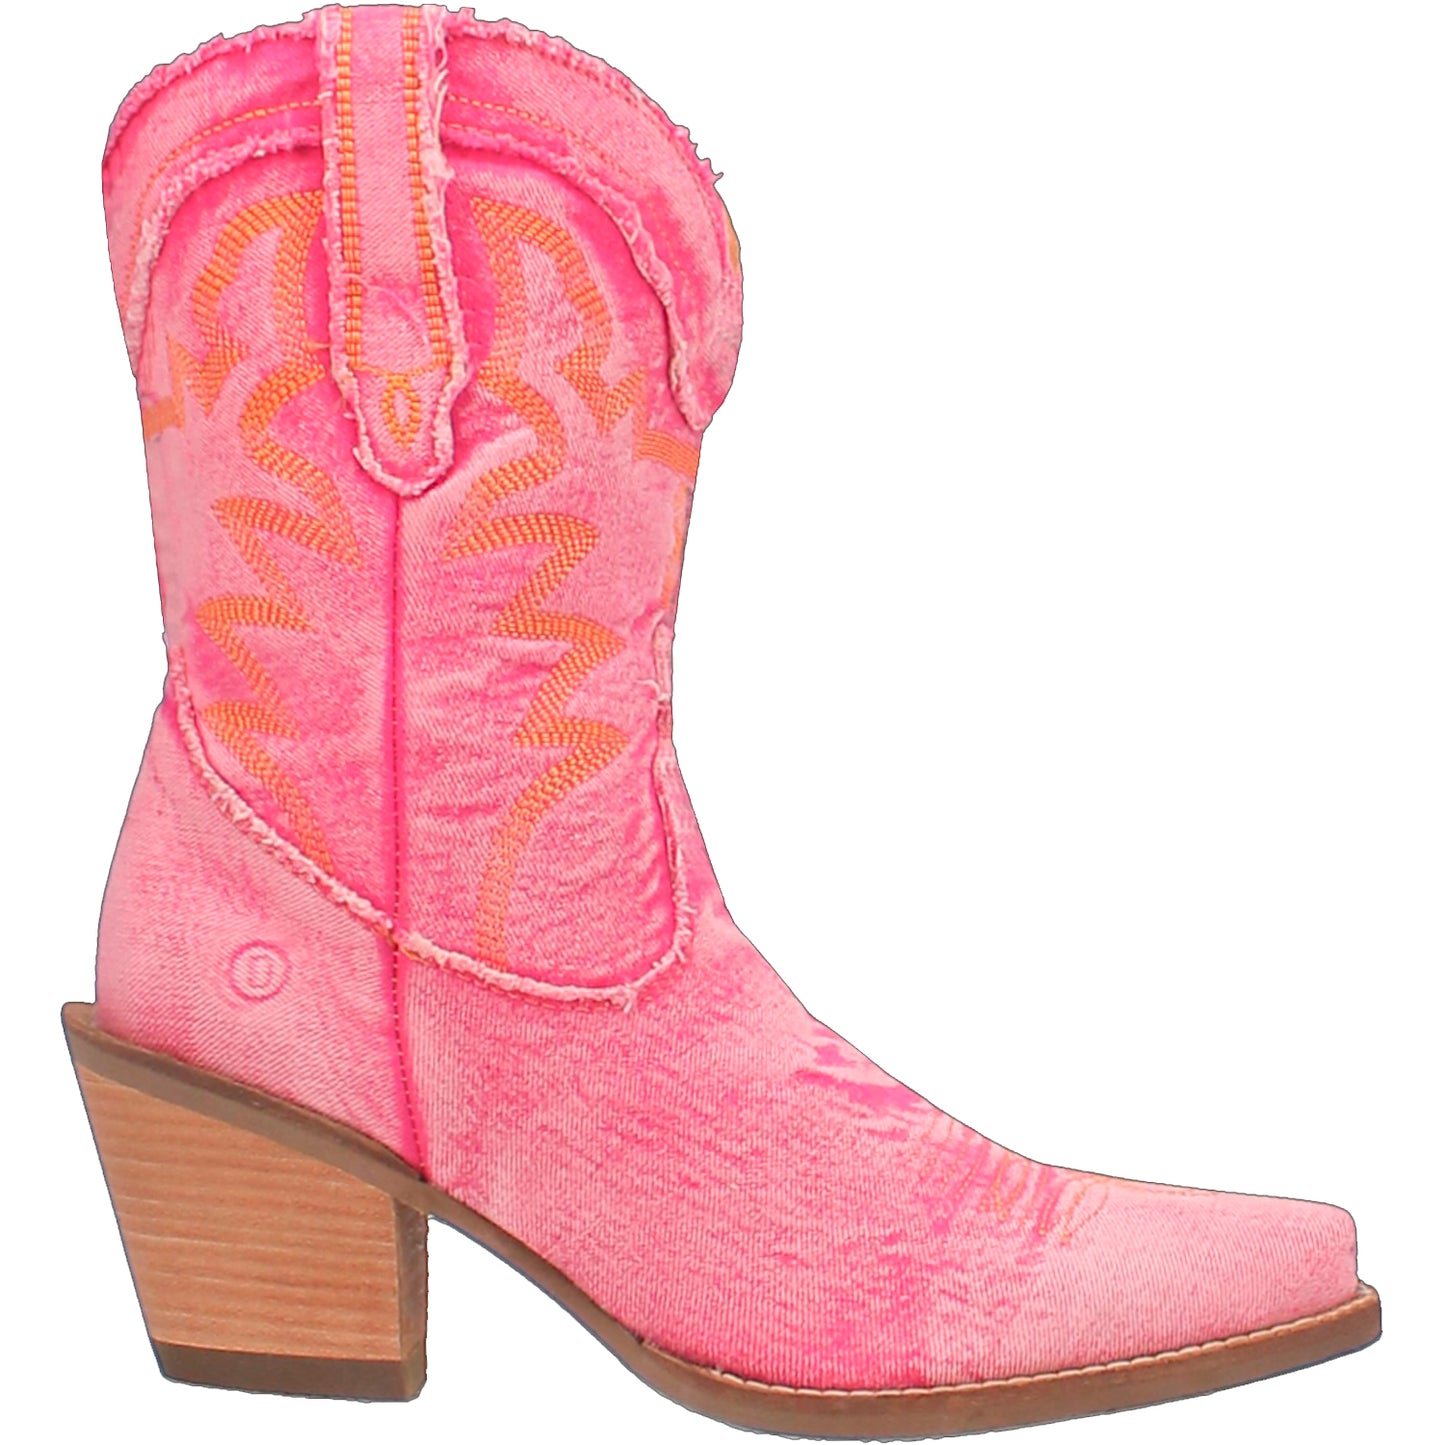 YA'LL NEED DOLLY PINK BOOTIE